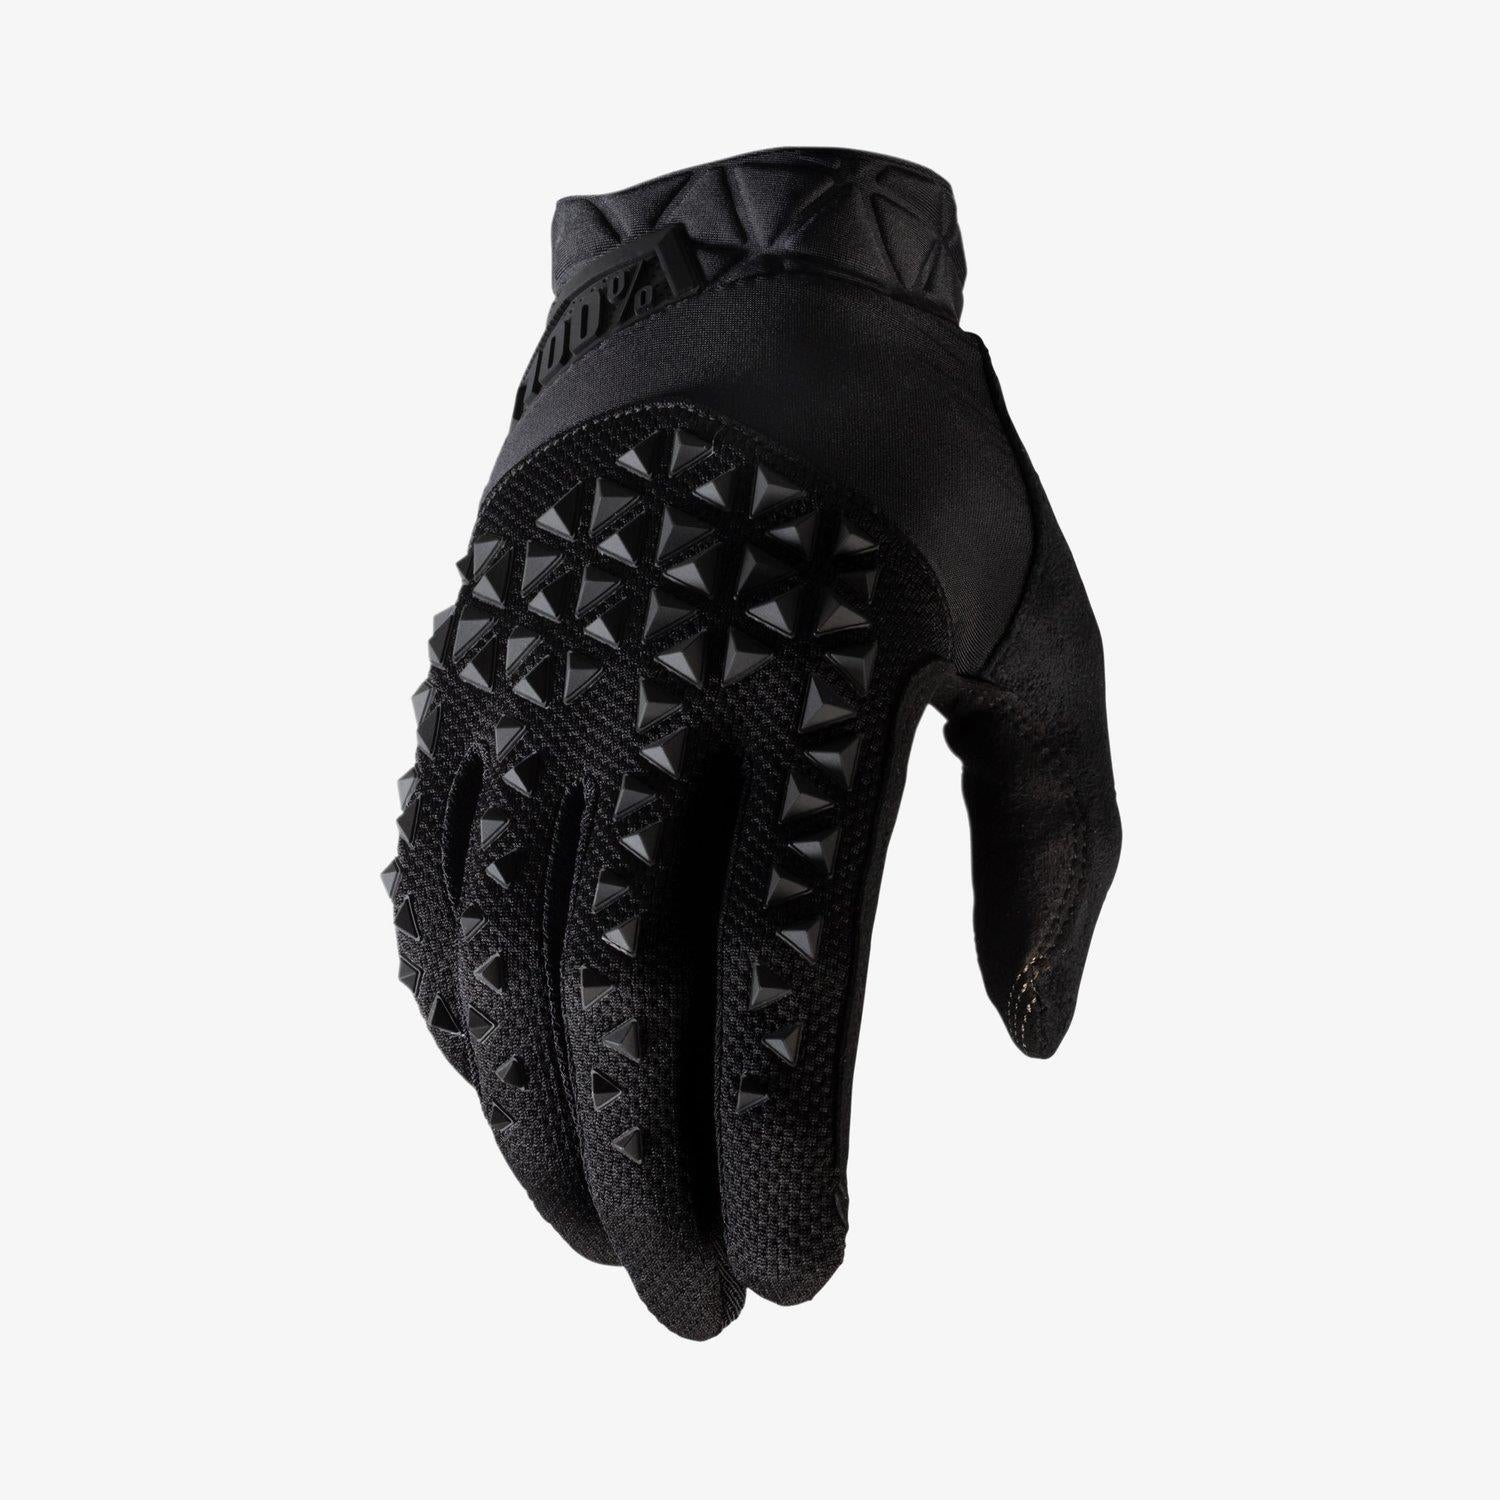 An image of 100% Geomatic Race Gloves - Black X Large BMX Gloves